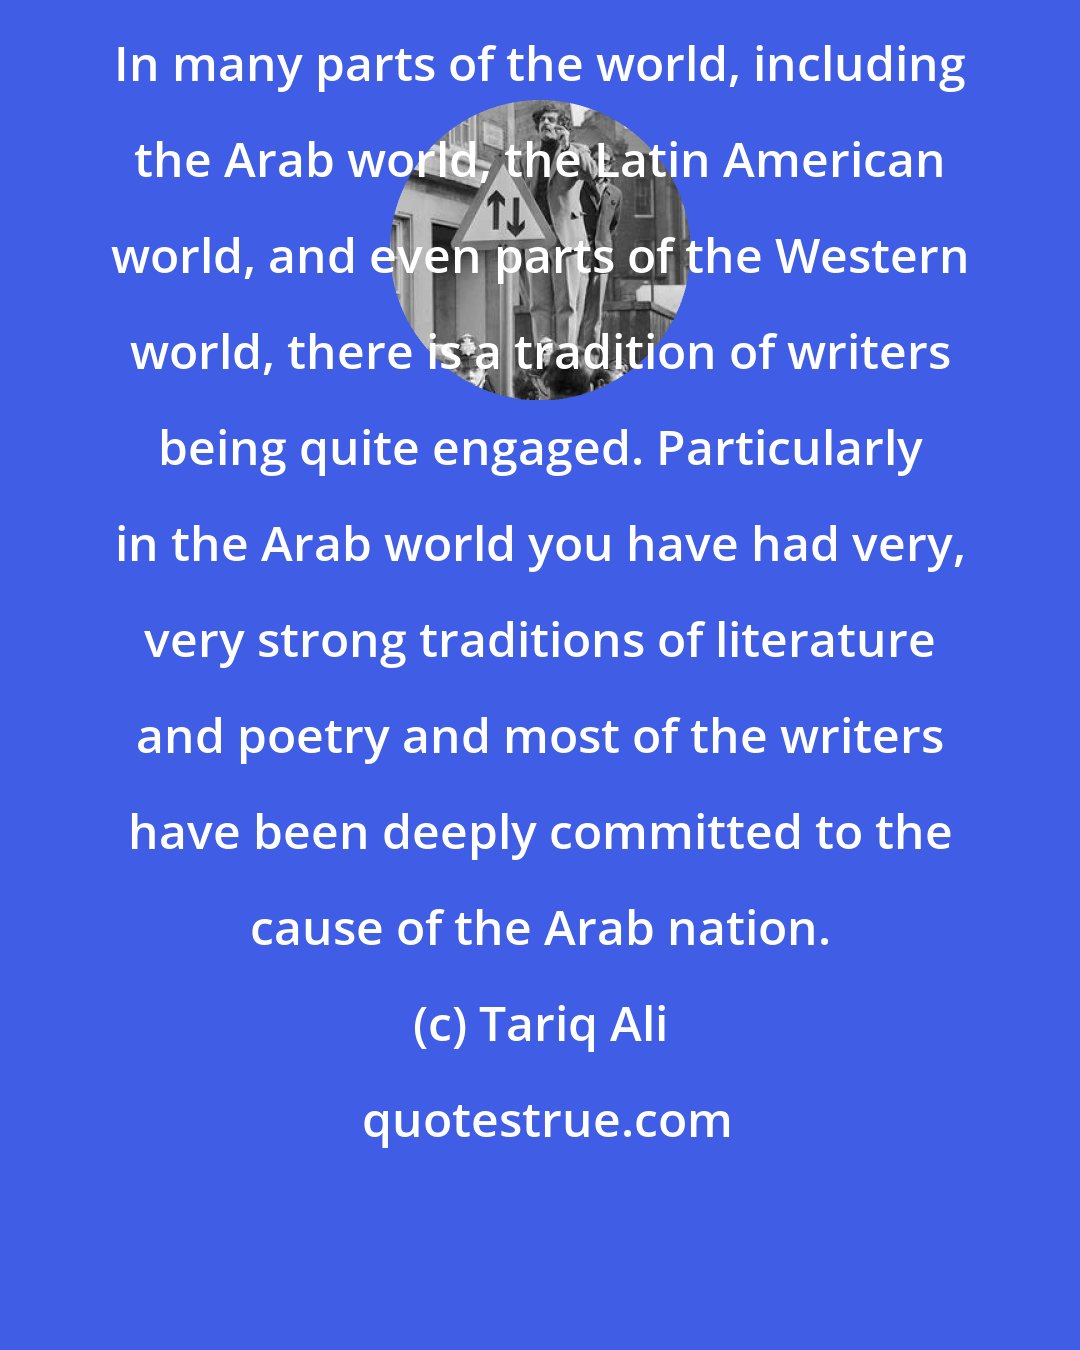 Tariq Ali: In many parts of the world, including the Arab world, the Latin American world, and even parts of the Western world, there is a tradition of writers being quite engaged. Particularly in the Arab world you have had very, very strong traditions of literature and poetry and most of the writers have been deeply committed to the cause of the Arab nation.